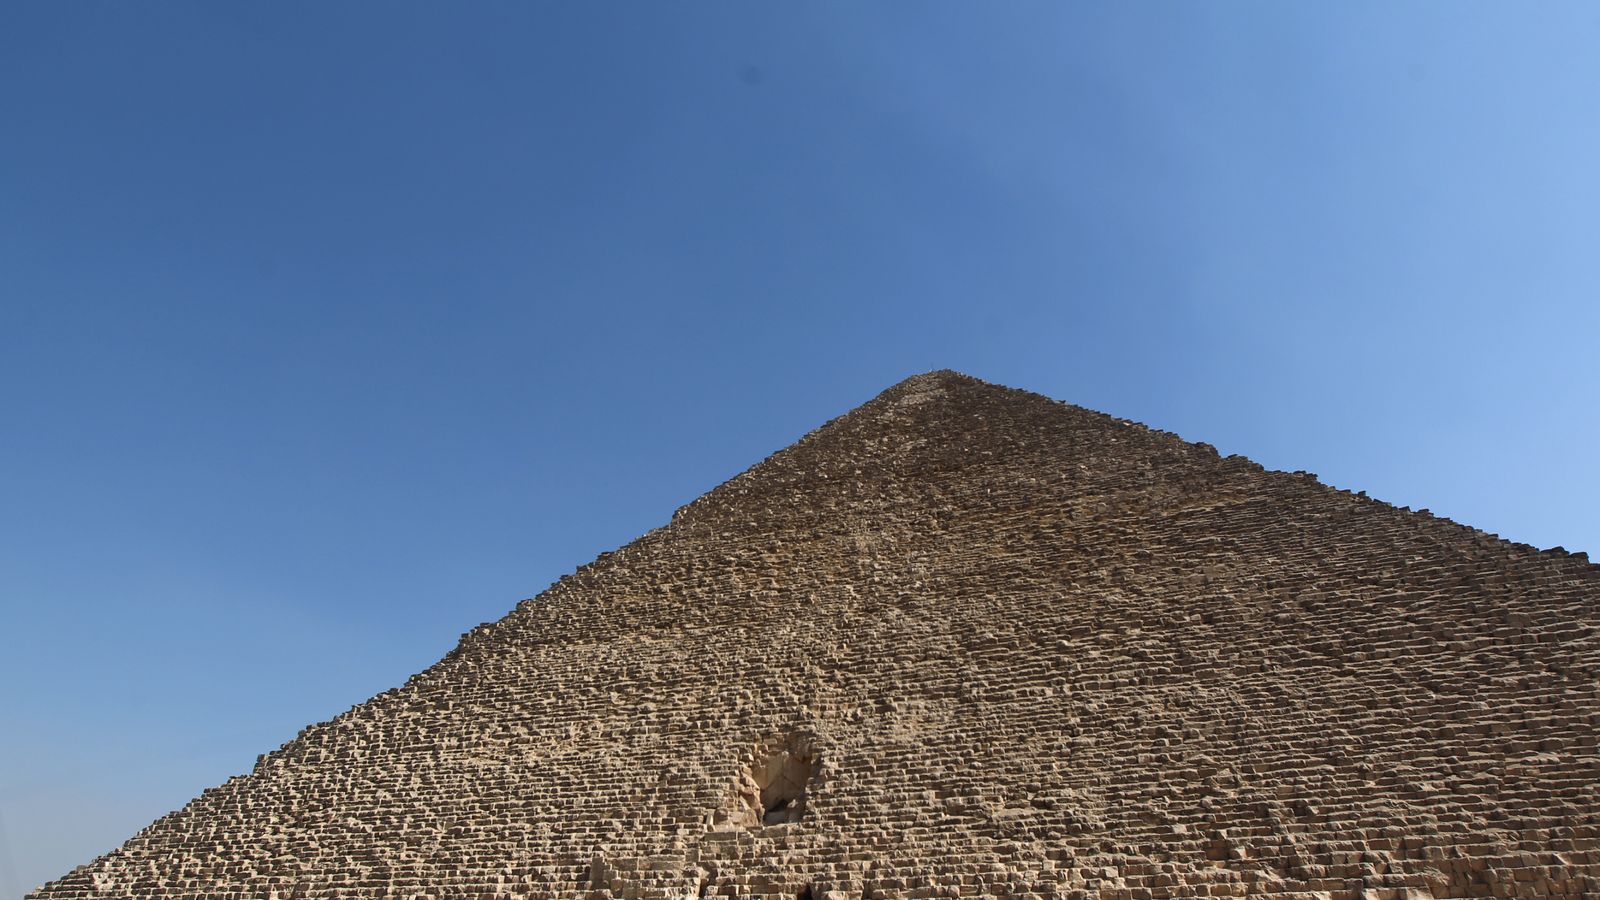 Egypt investigates explicit video and photos at top of Great Pyramid